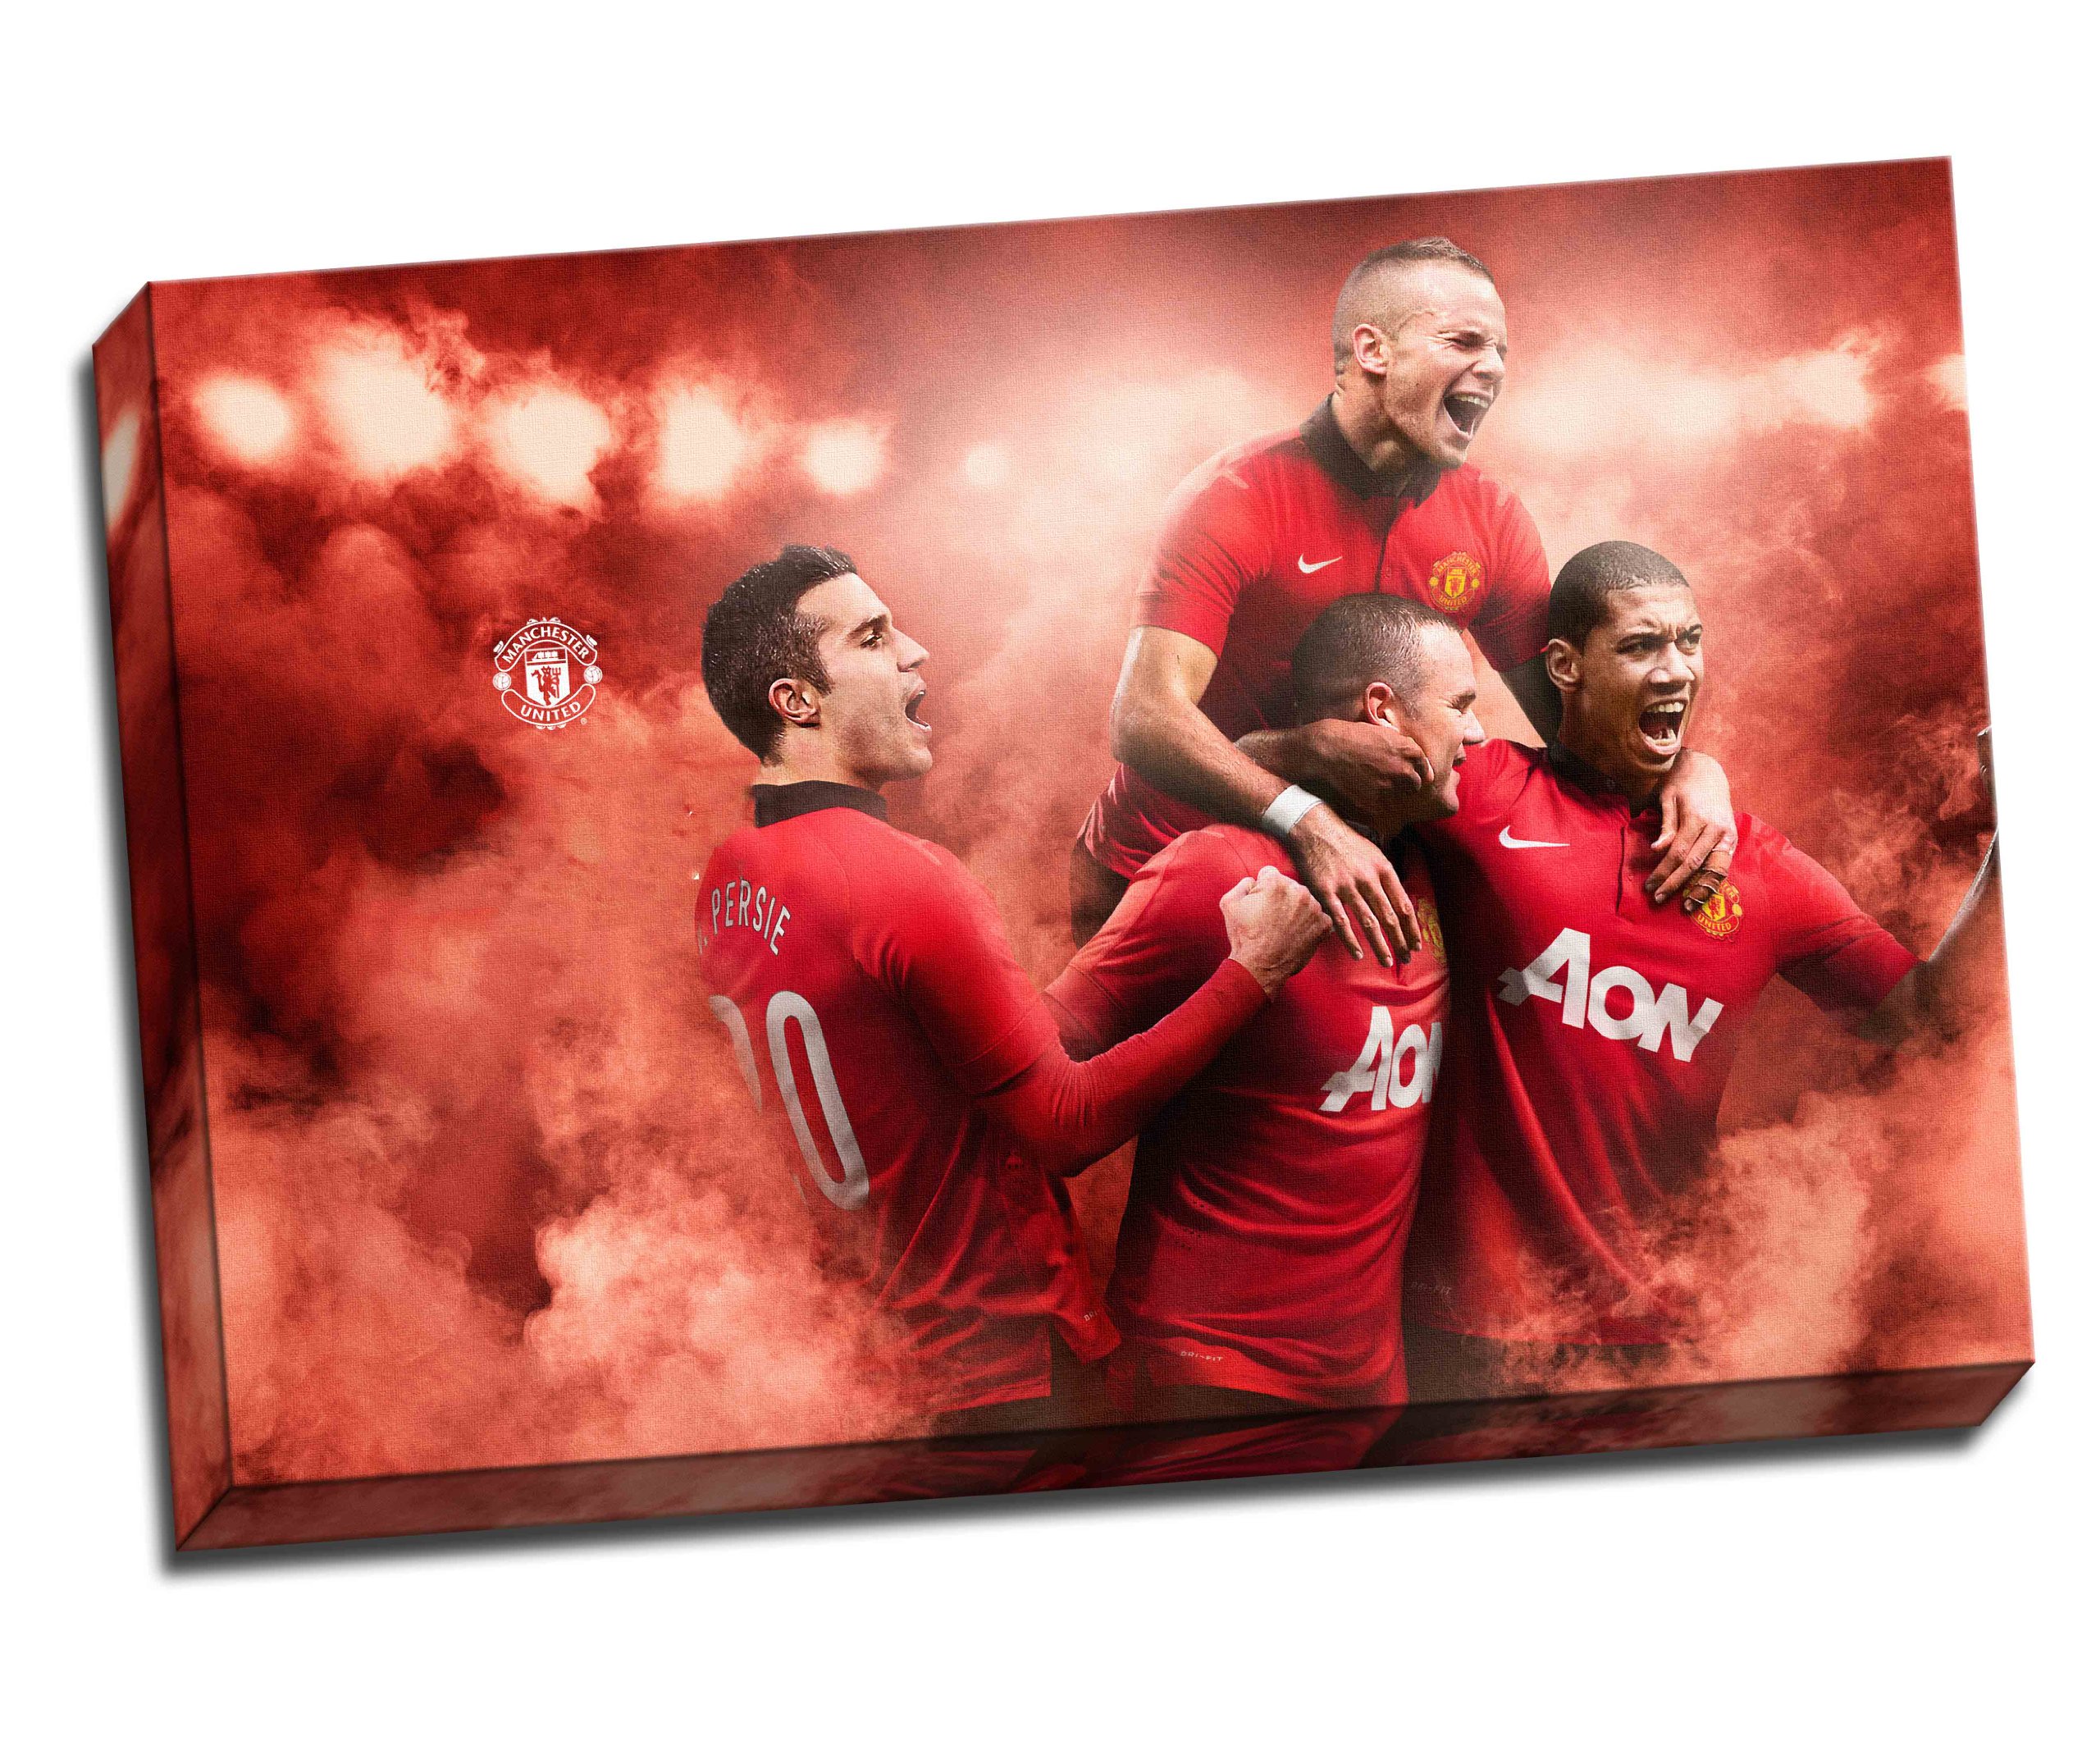 Panther Print Manchester United Canvas Art Print Poster 30"X 20" Inches 76.2 x 50.8 cm